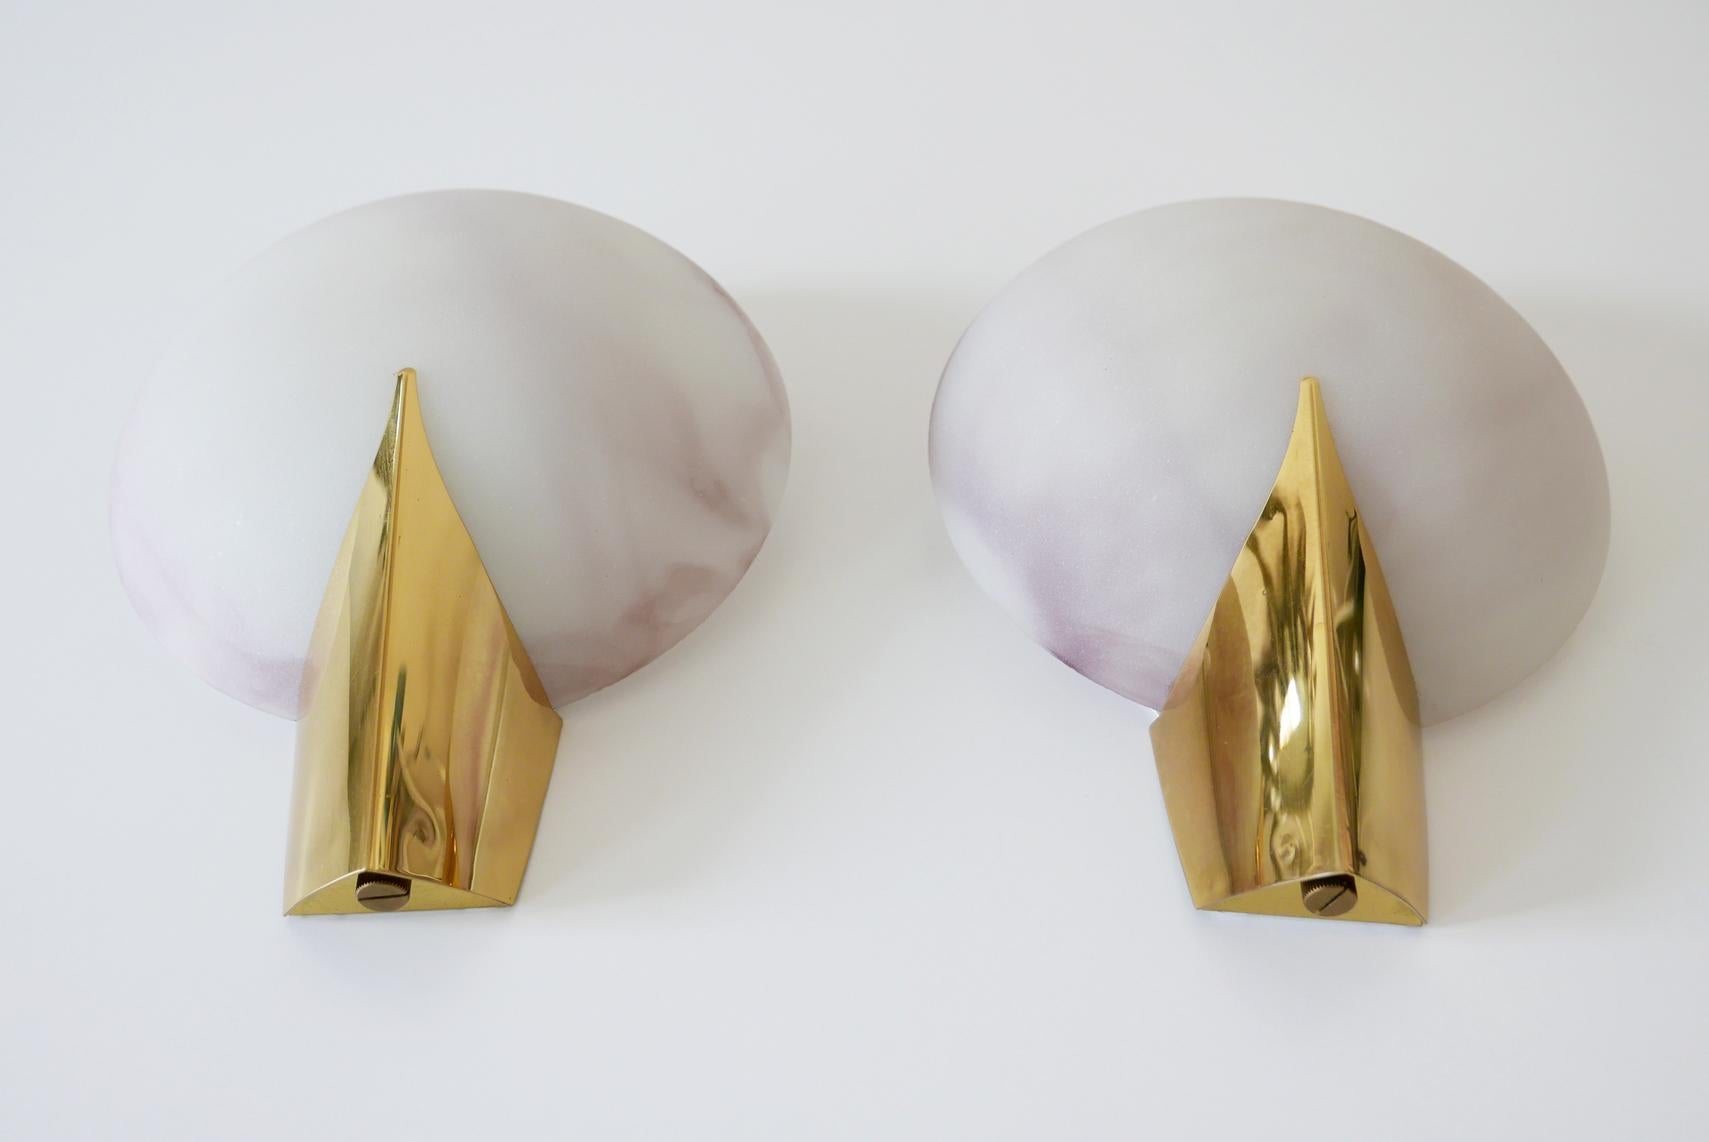 Set of Two Elegant Modernist Wall Lamps or Sconces by J.T. Kalmar, 1980s Austria In Good Condition For Sale In Munich, DE